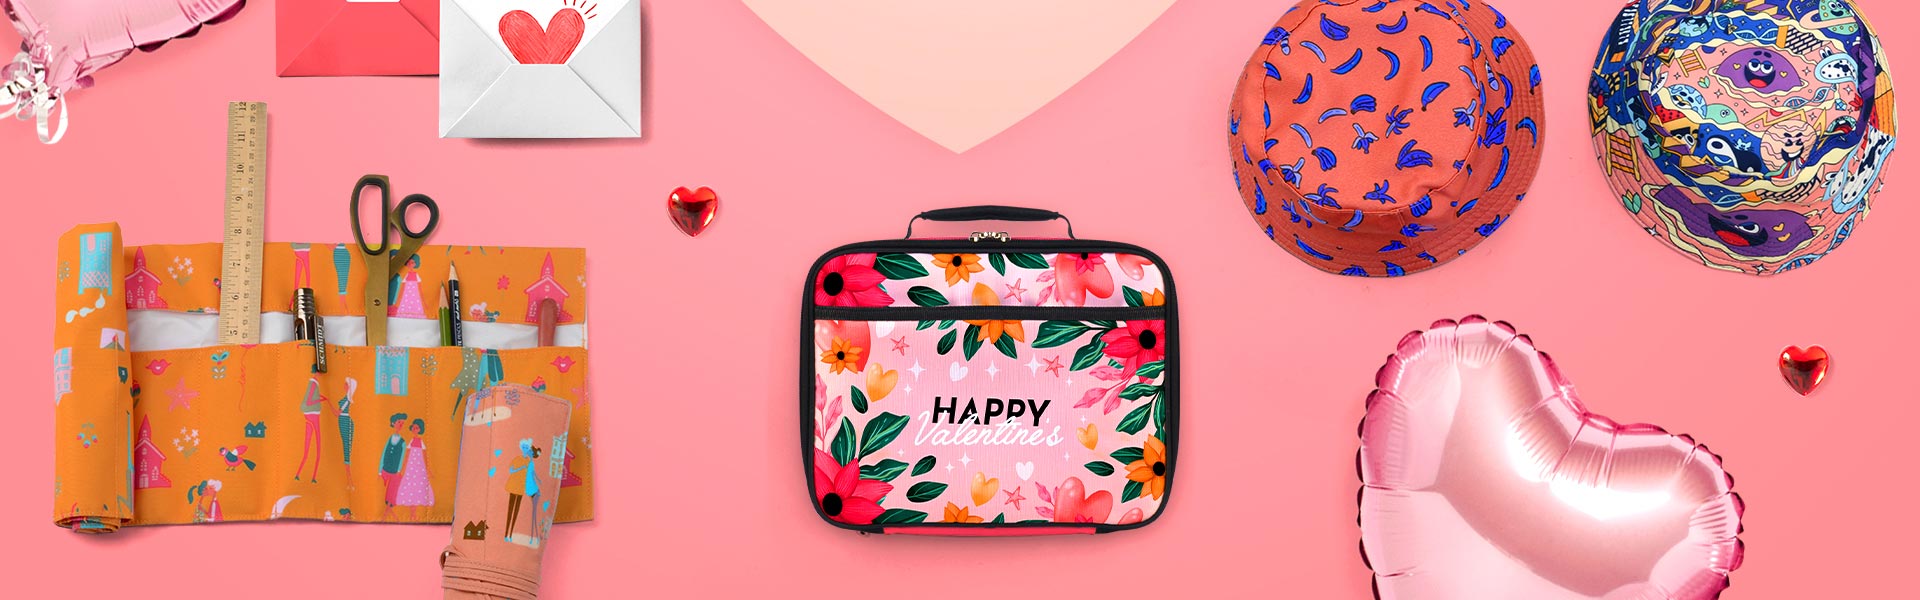 Design a selection of Valentine’s Gifts: 2 for $30 with Free International Shipping